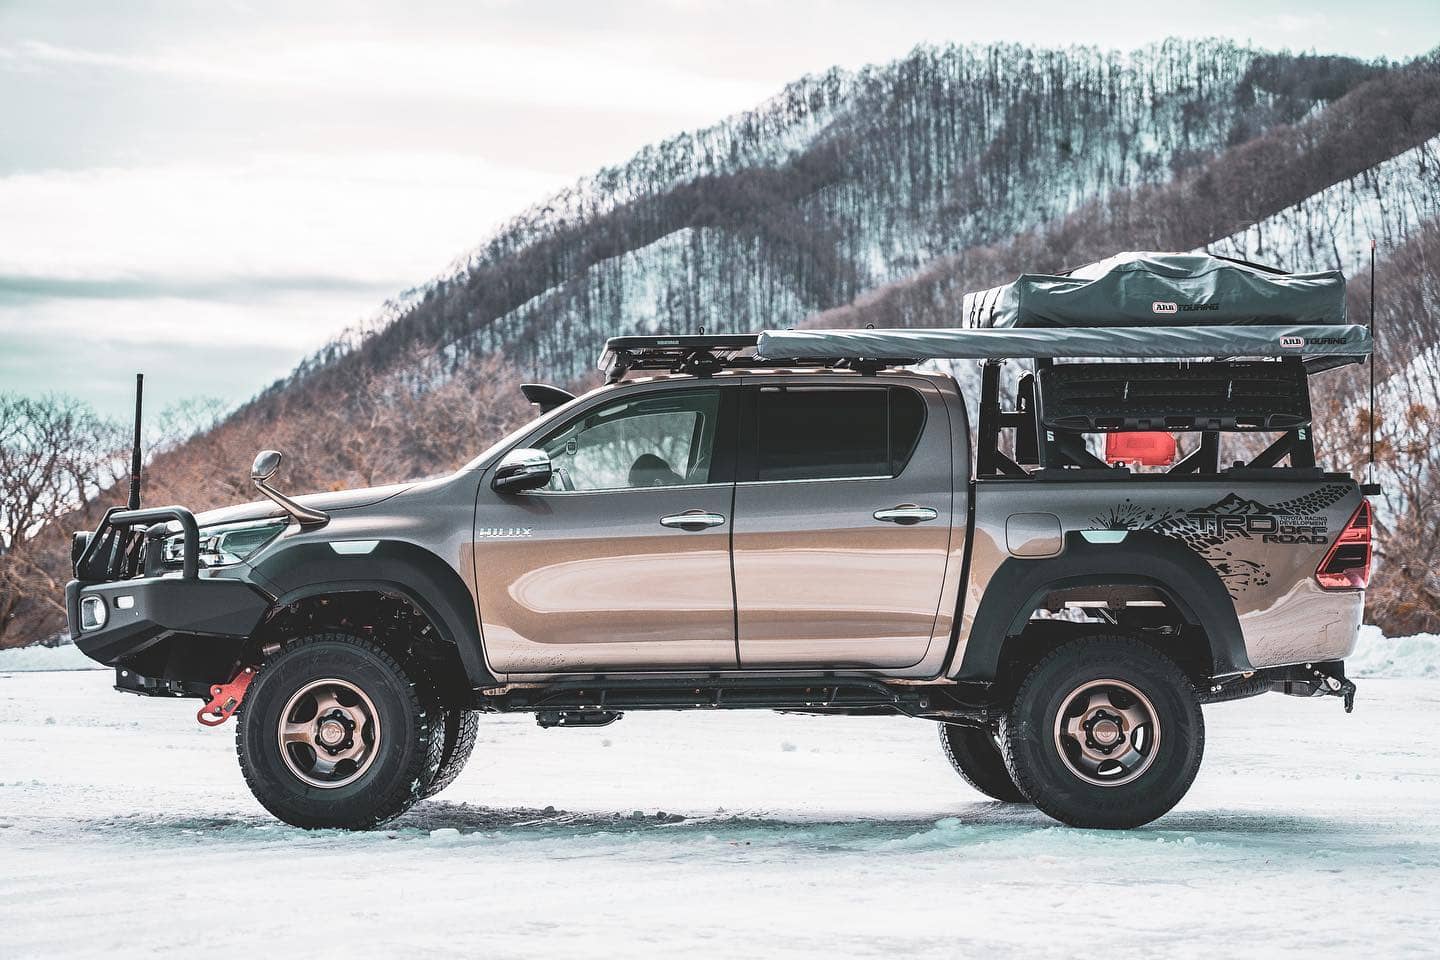 Lifted Toyota Hilux overland truck in Japan with RHD